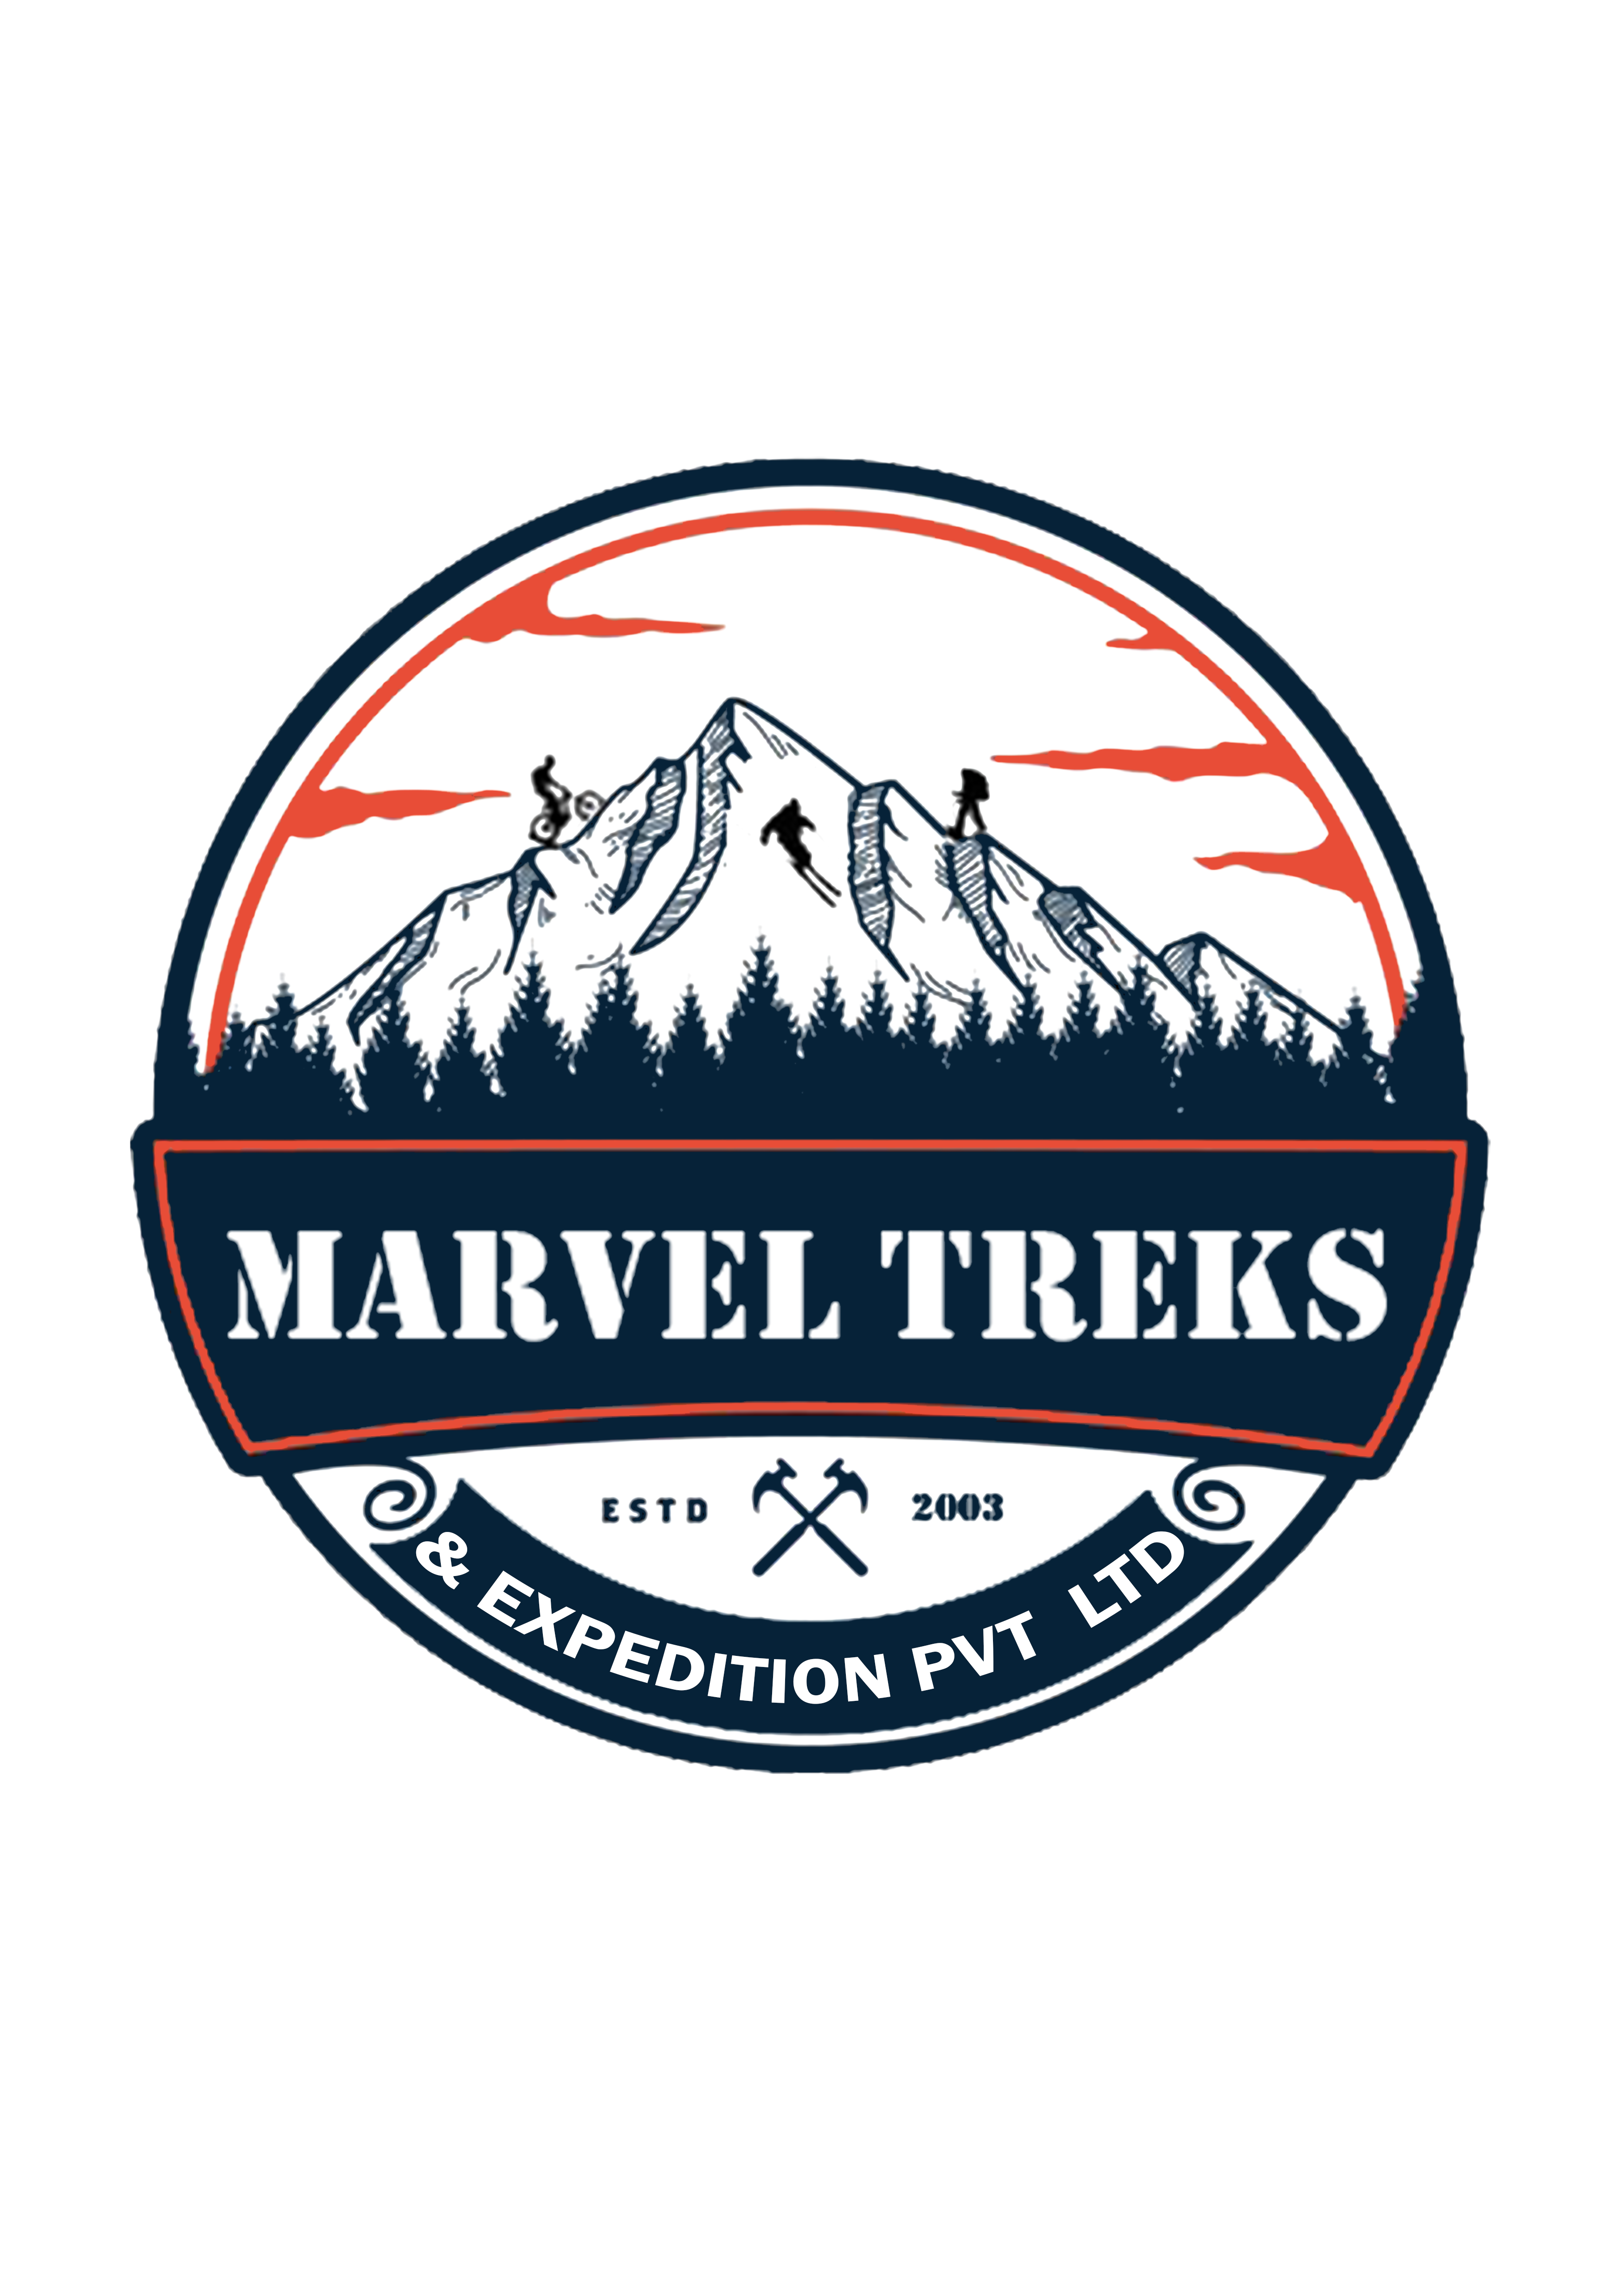 Marvel Treks And Expedition